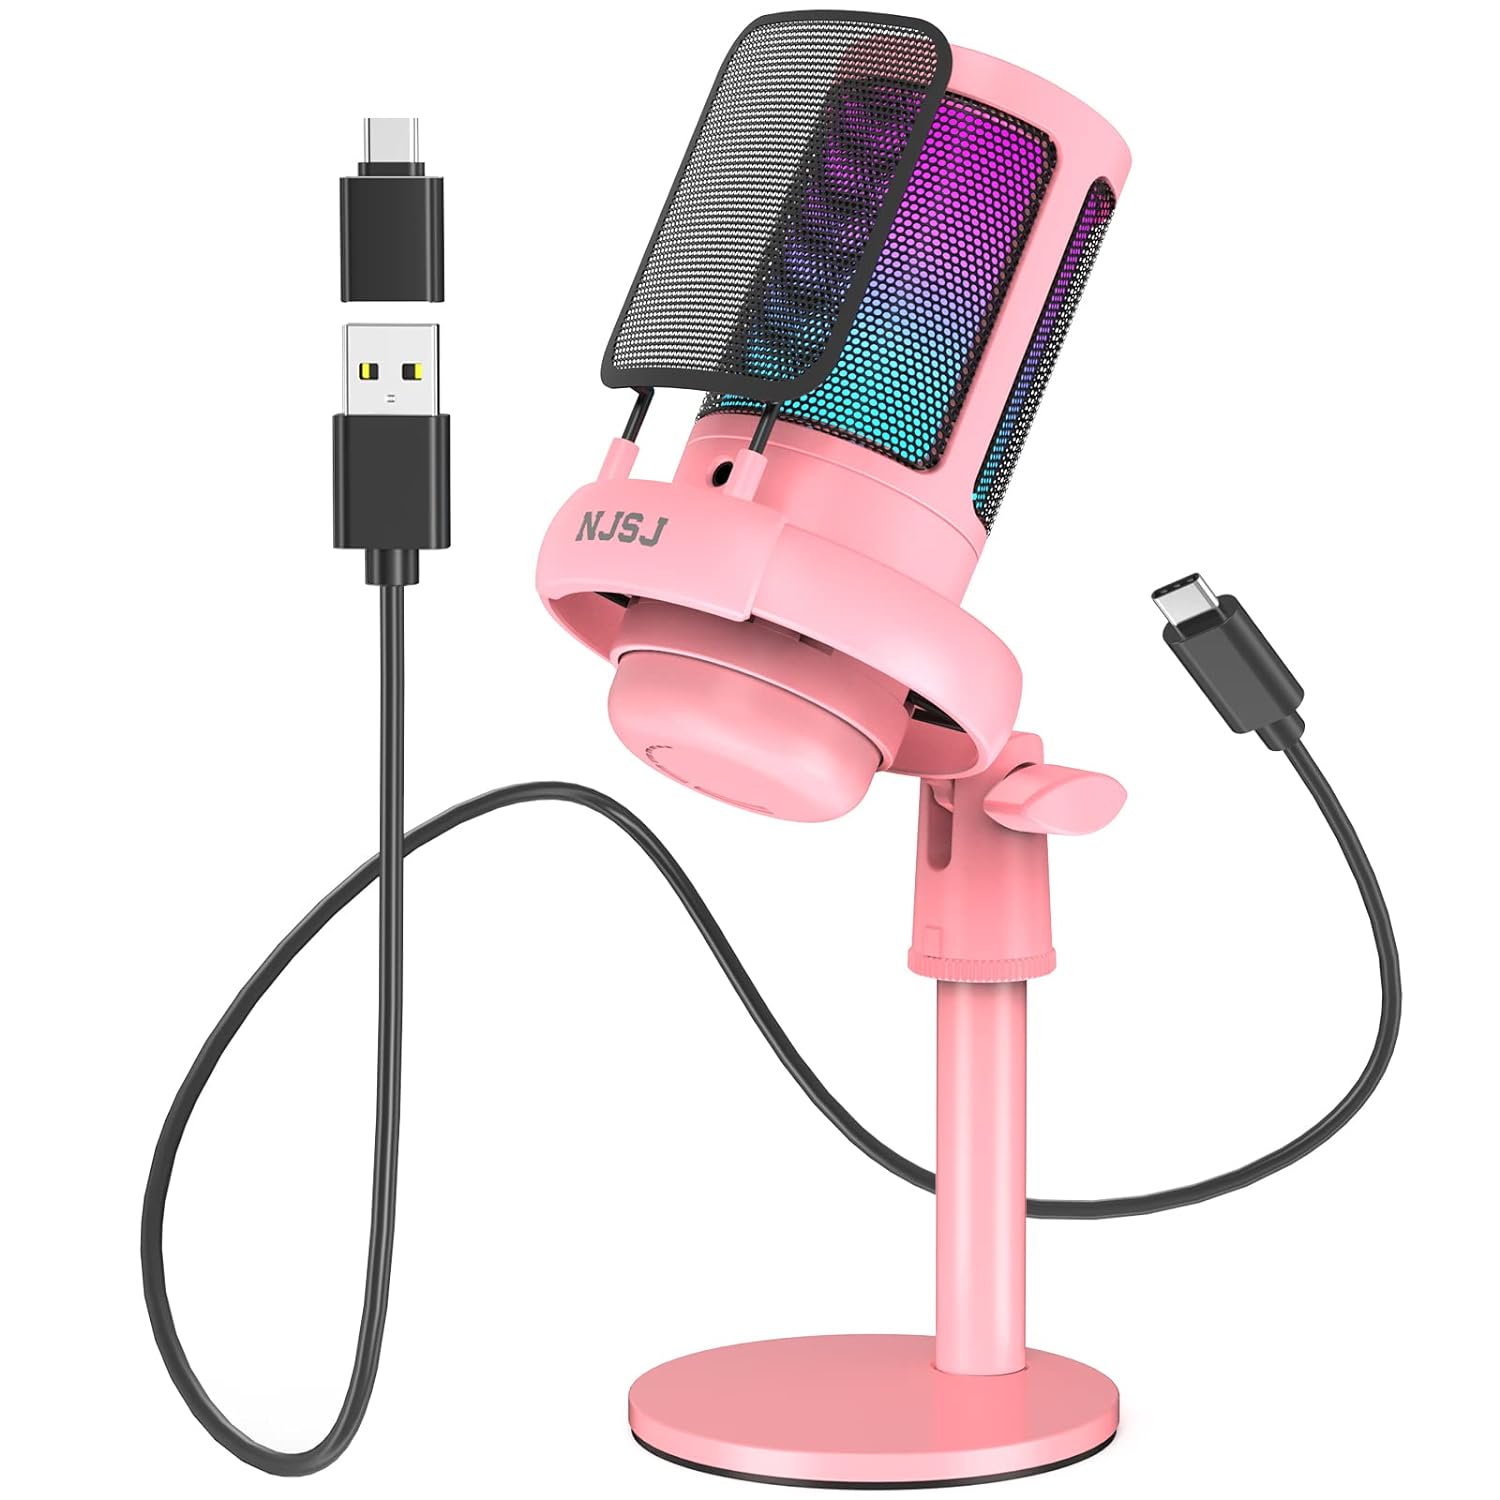 NJSJ USB Microphone for PC, Gaming Mic for PS4/ PS5/ Mac/Phone,Condenser Microphone with Touch Mute, RGB Lighting,Gain knob & Monitoring Jack for Streaming,Podcasting (with Desktop Stand, Pink)